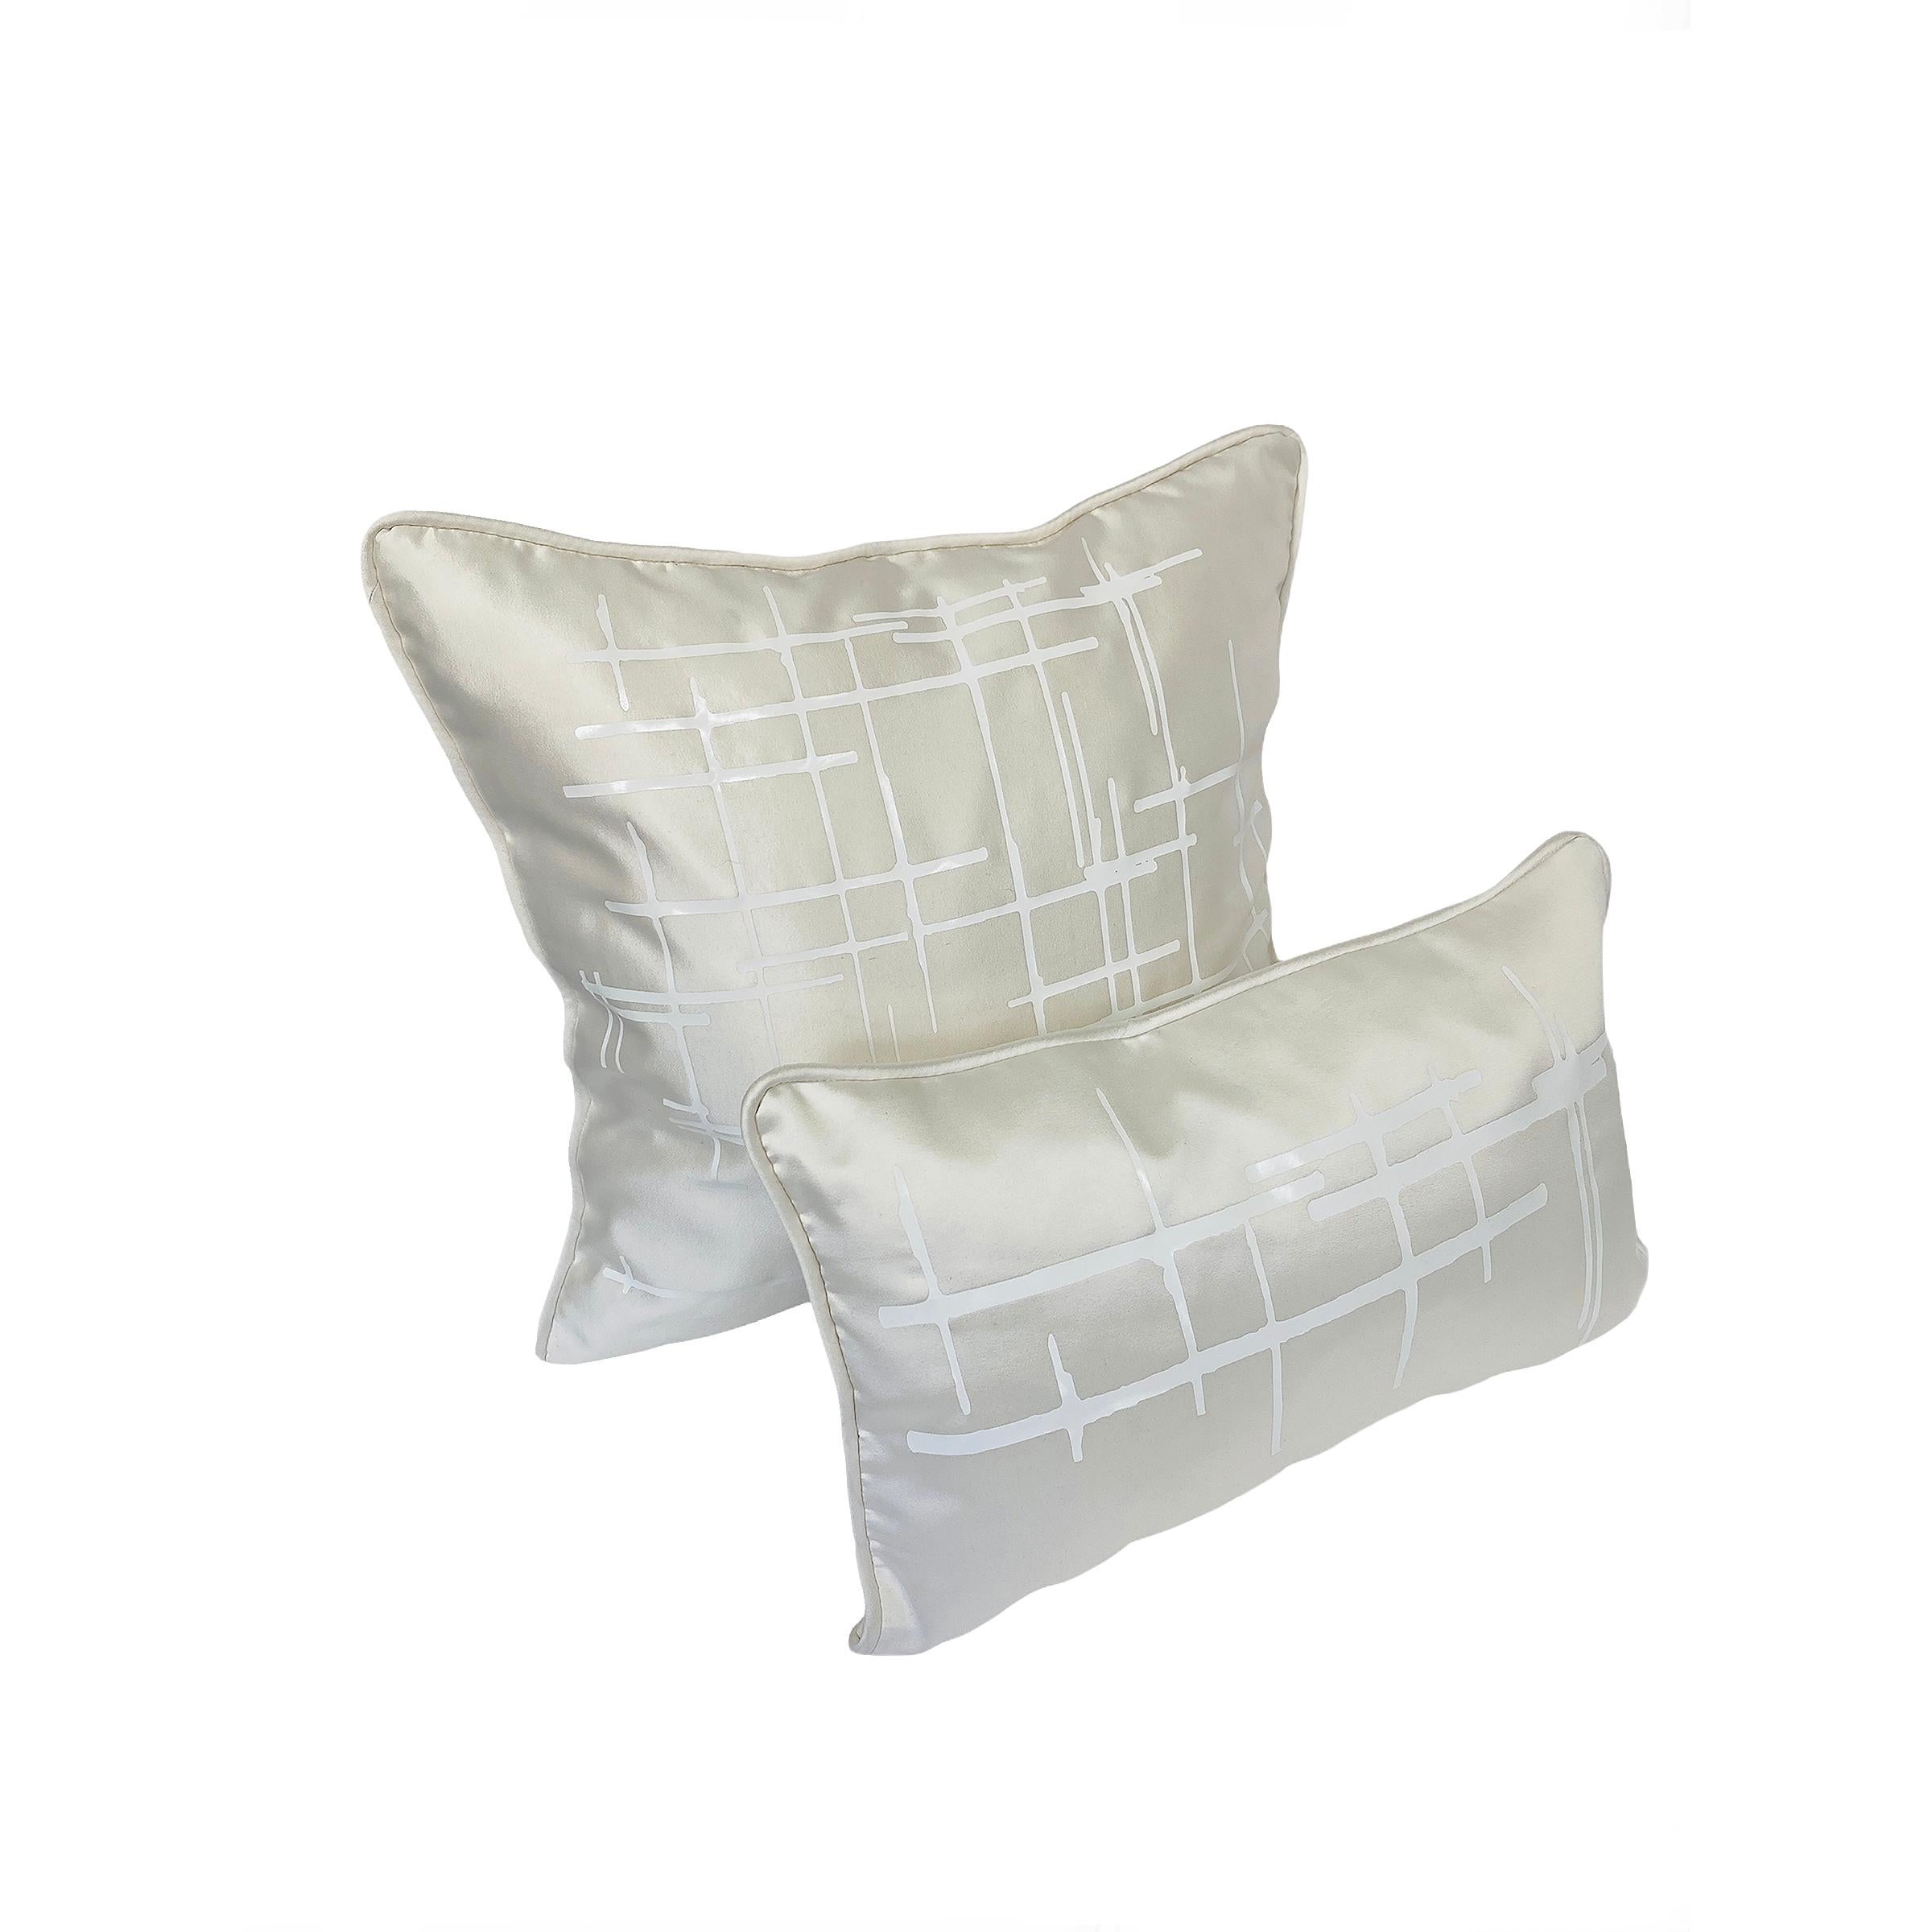 Authentic Italian silk wool in off-white. The luxury fabric is a blend of Italian virgin wool and silk, which makes for greater durability. This gives a perfect softness and sheen to the pillows, complementing any interior decor. The wool